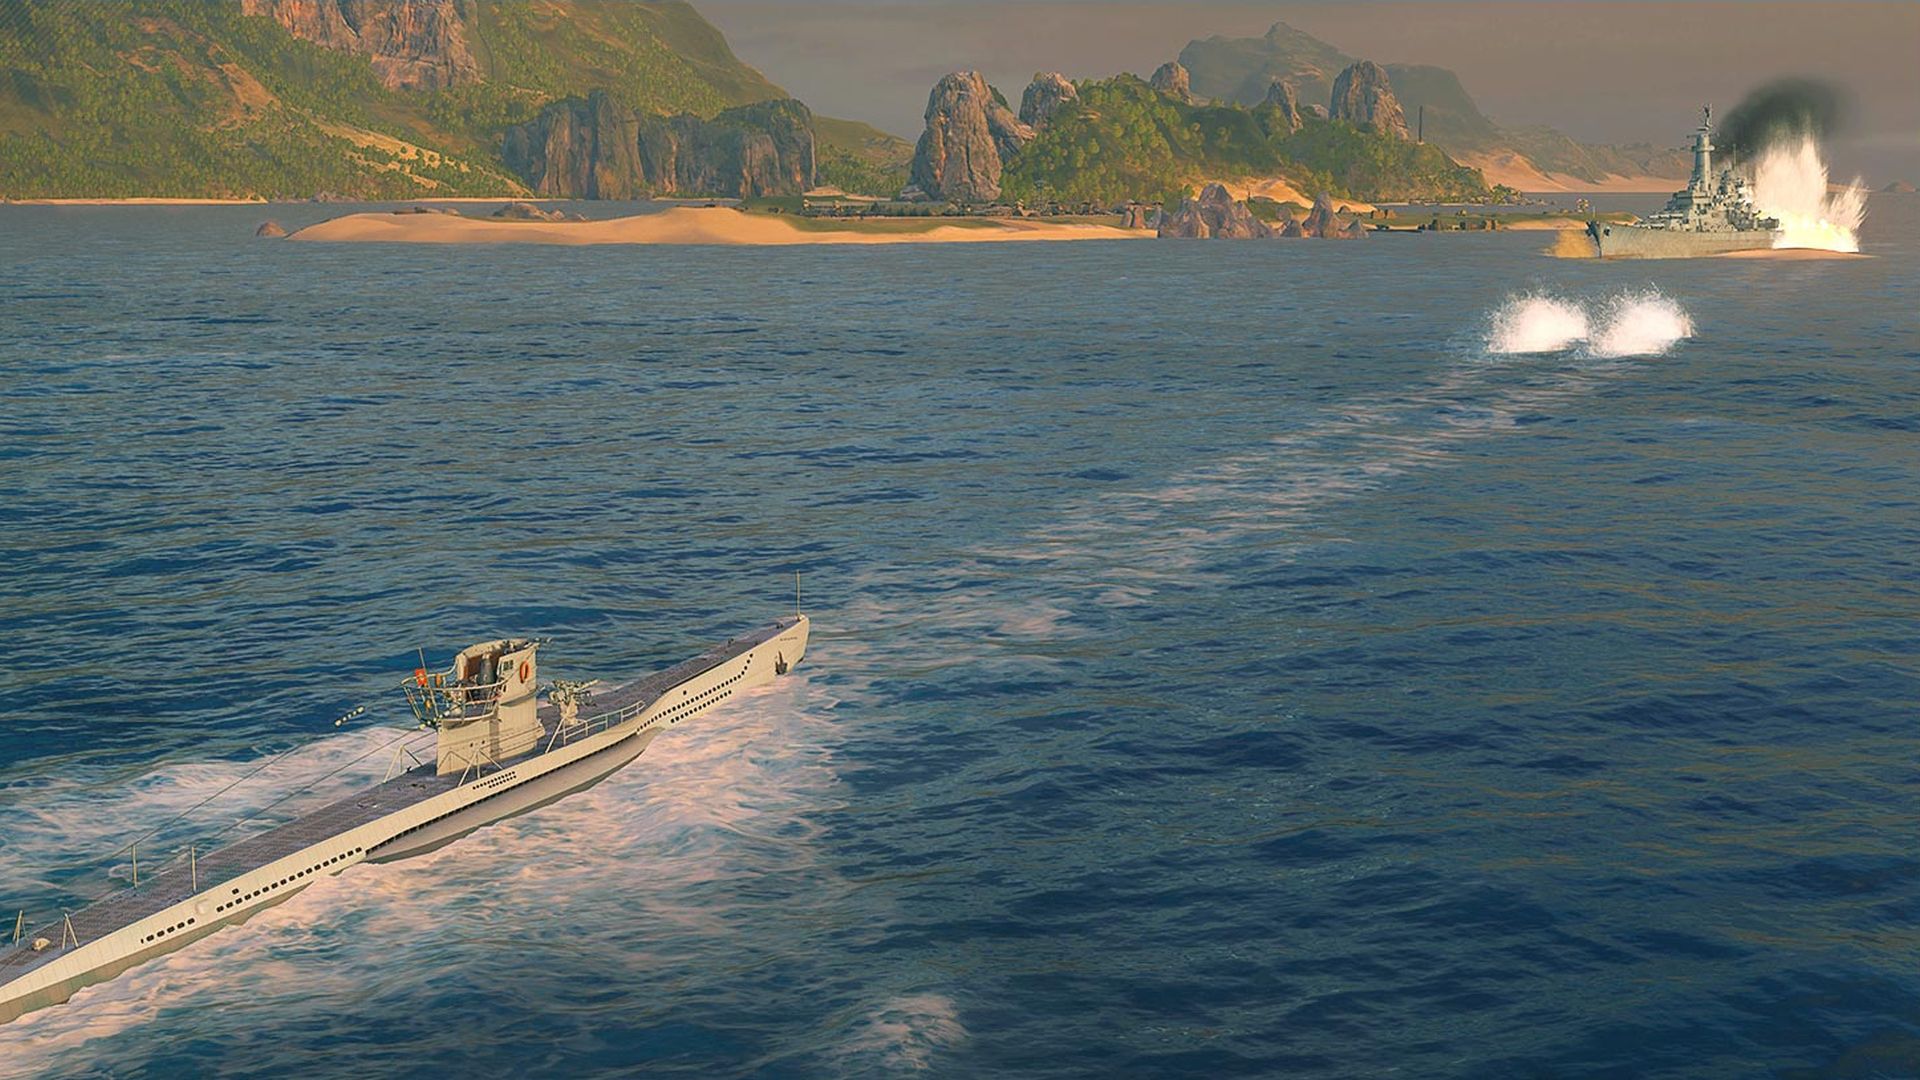 Best war games: a long boat fires two missiles on the water towards an enemy boat